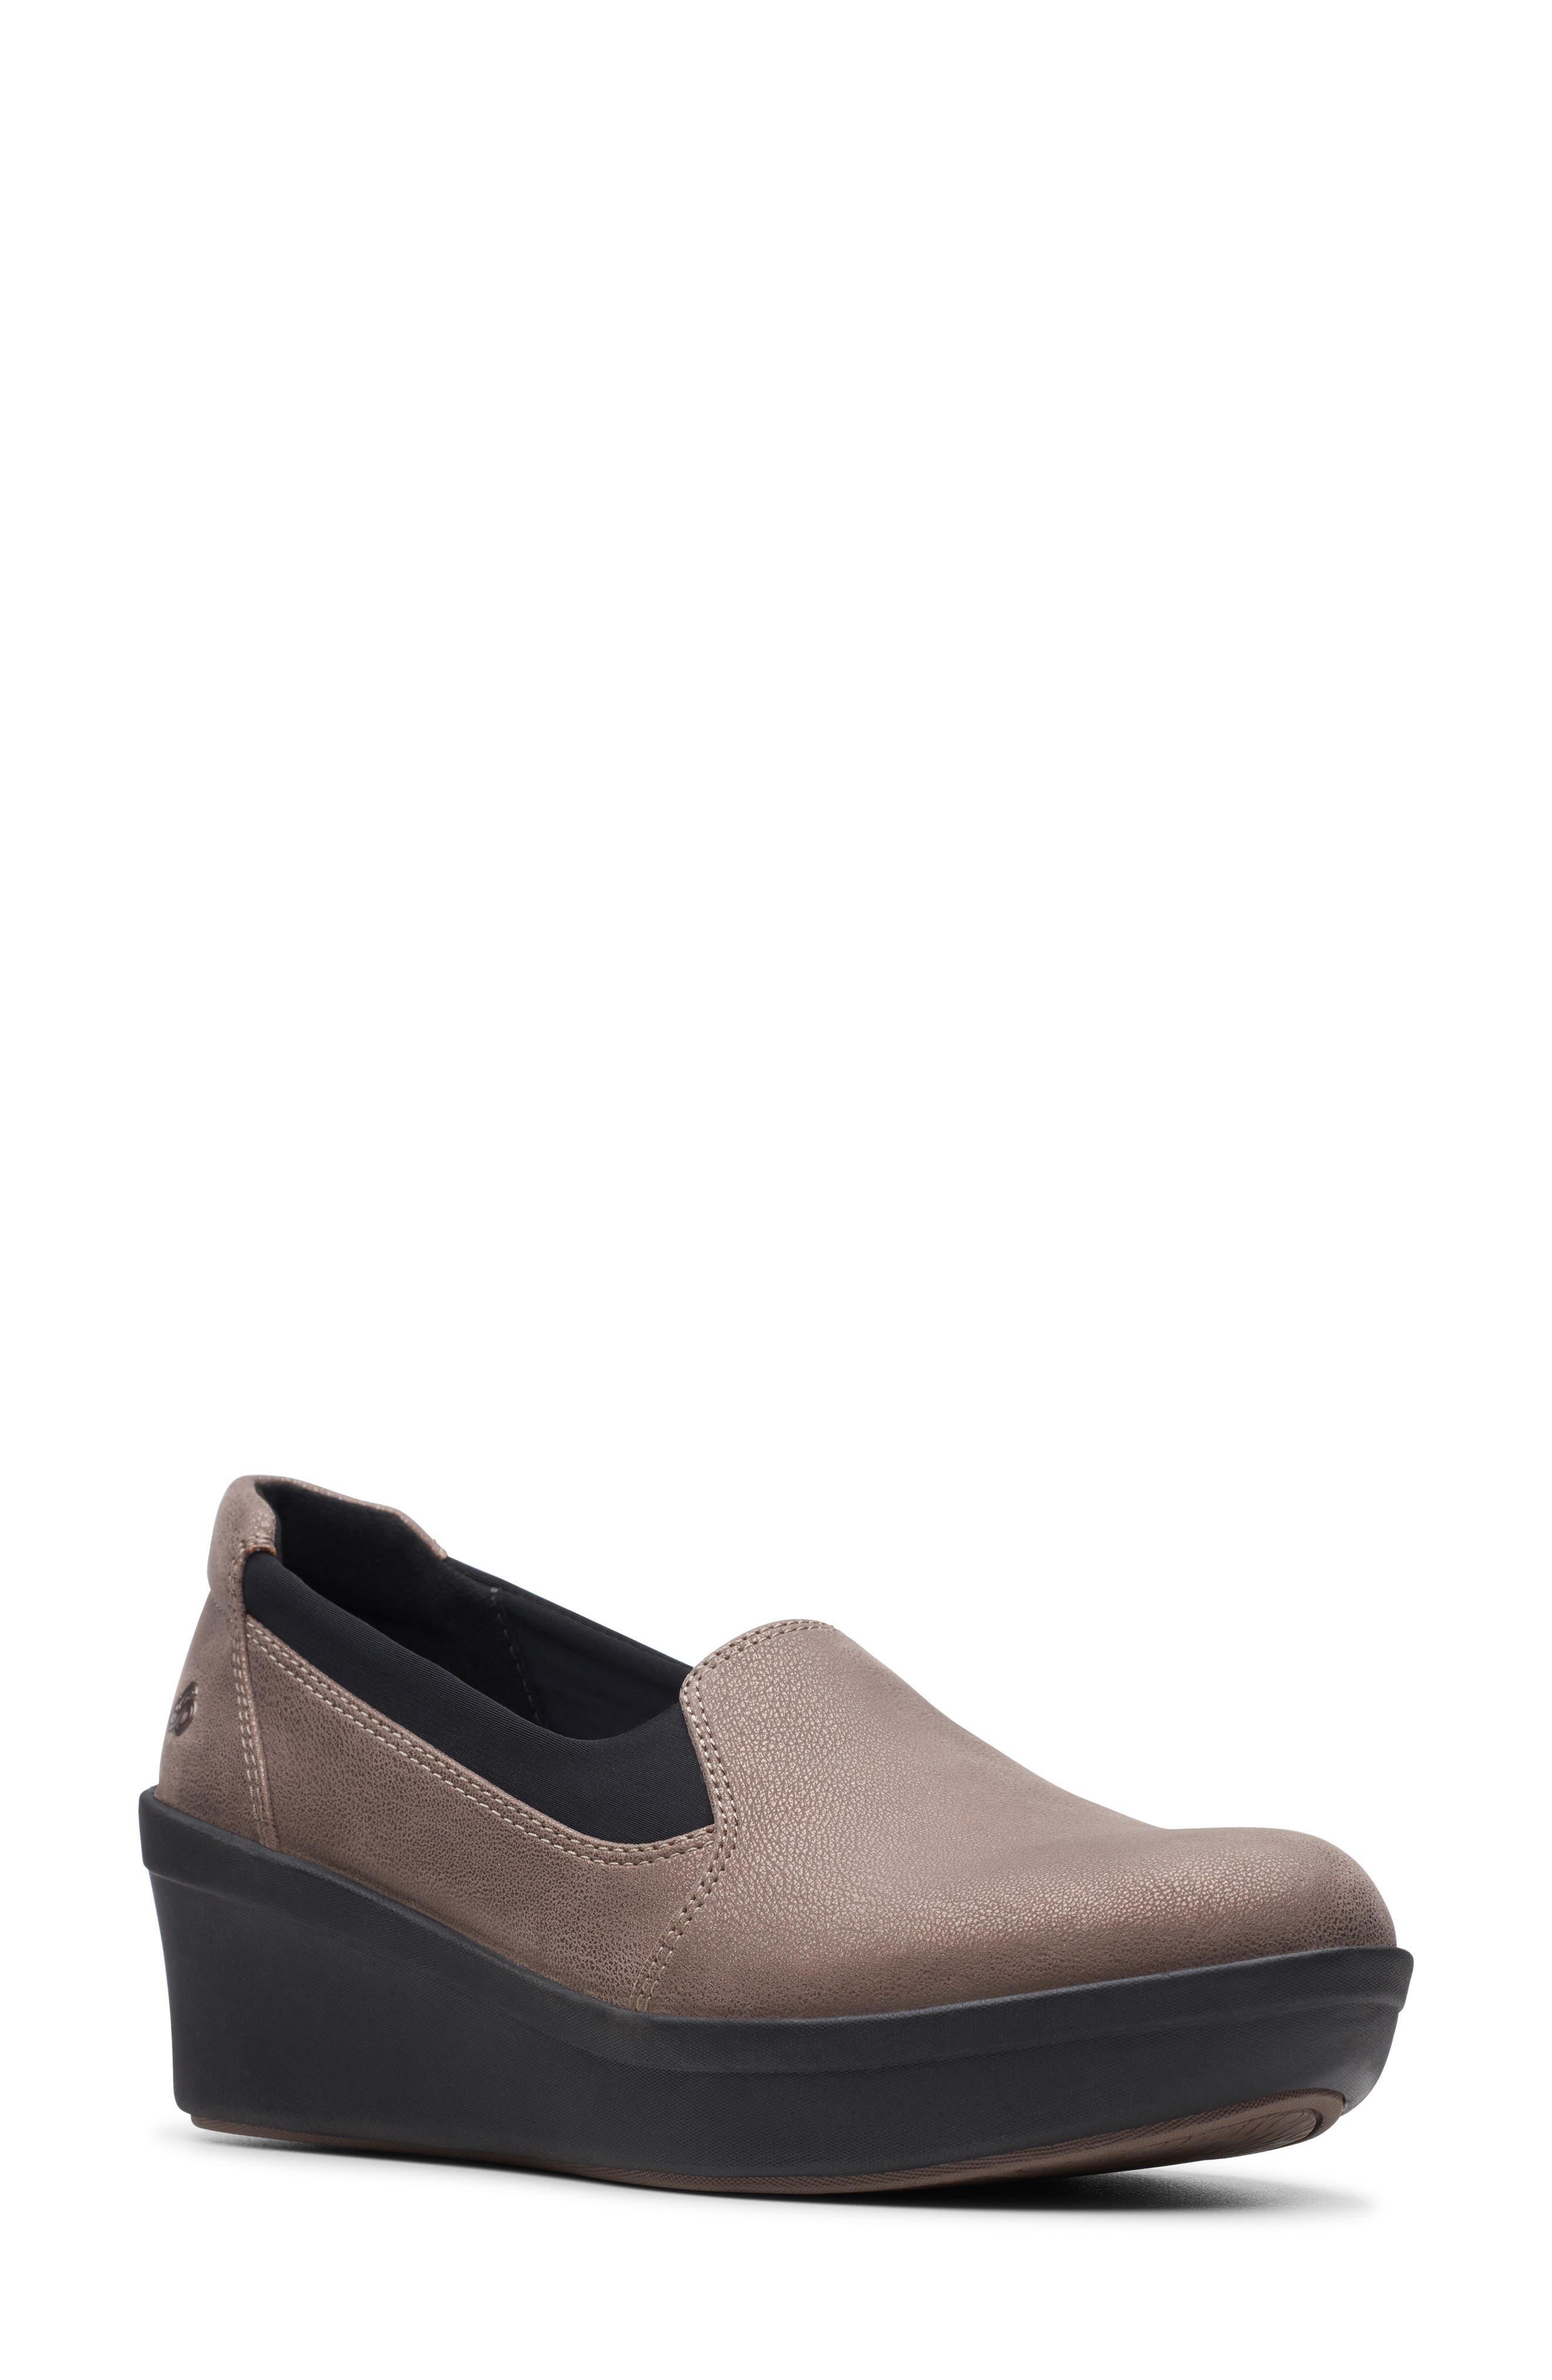 clarks wedge loafers